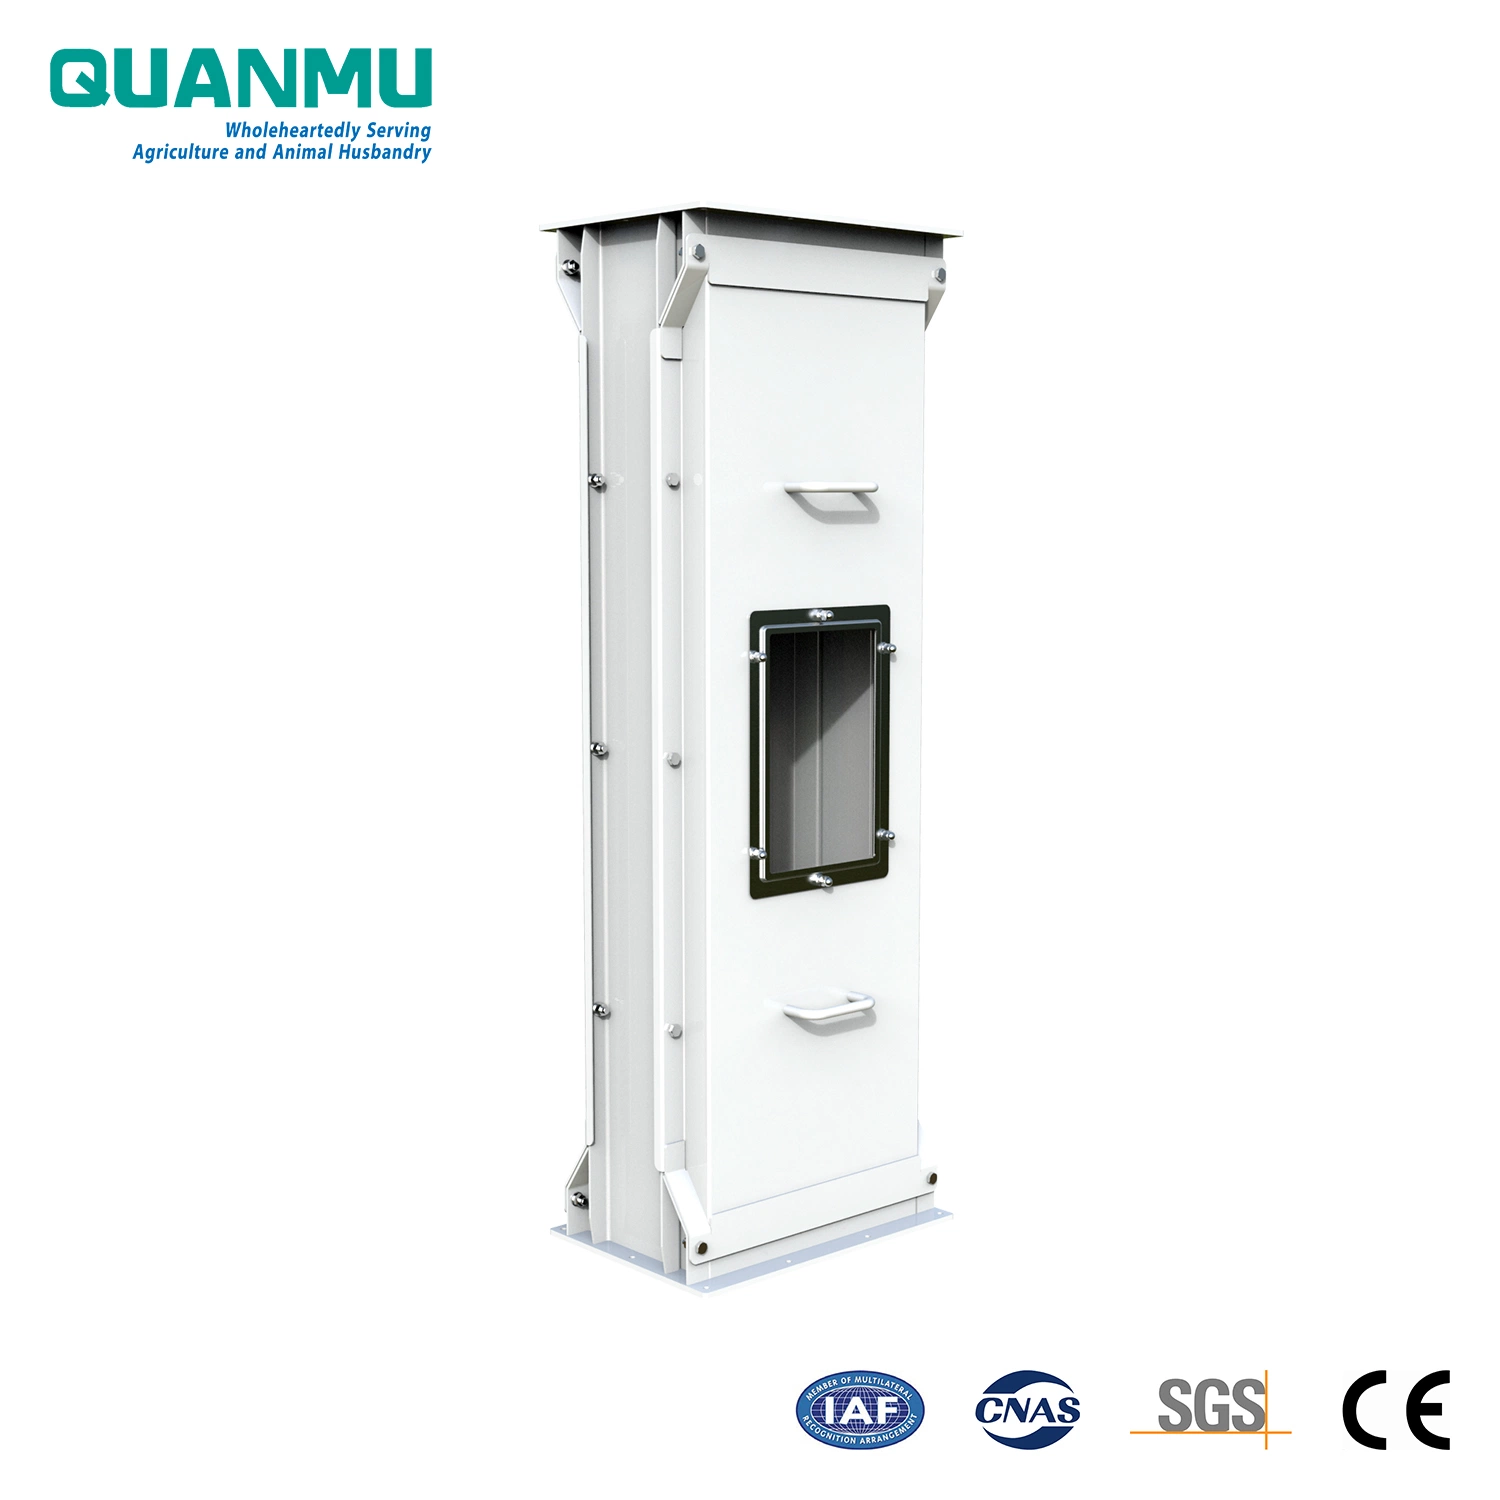 Best Price of Powder and Small Granular Materials Vertical Conveying Bucket Elevator with CE Certification